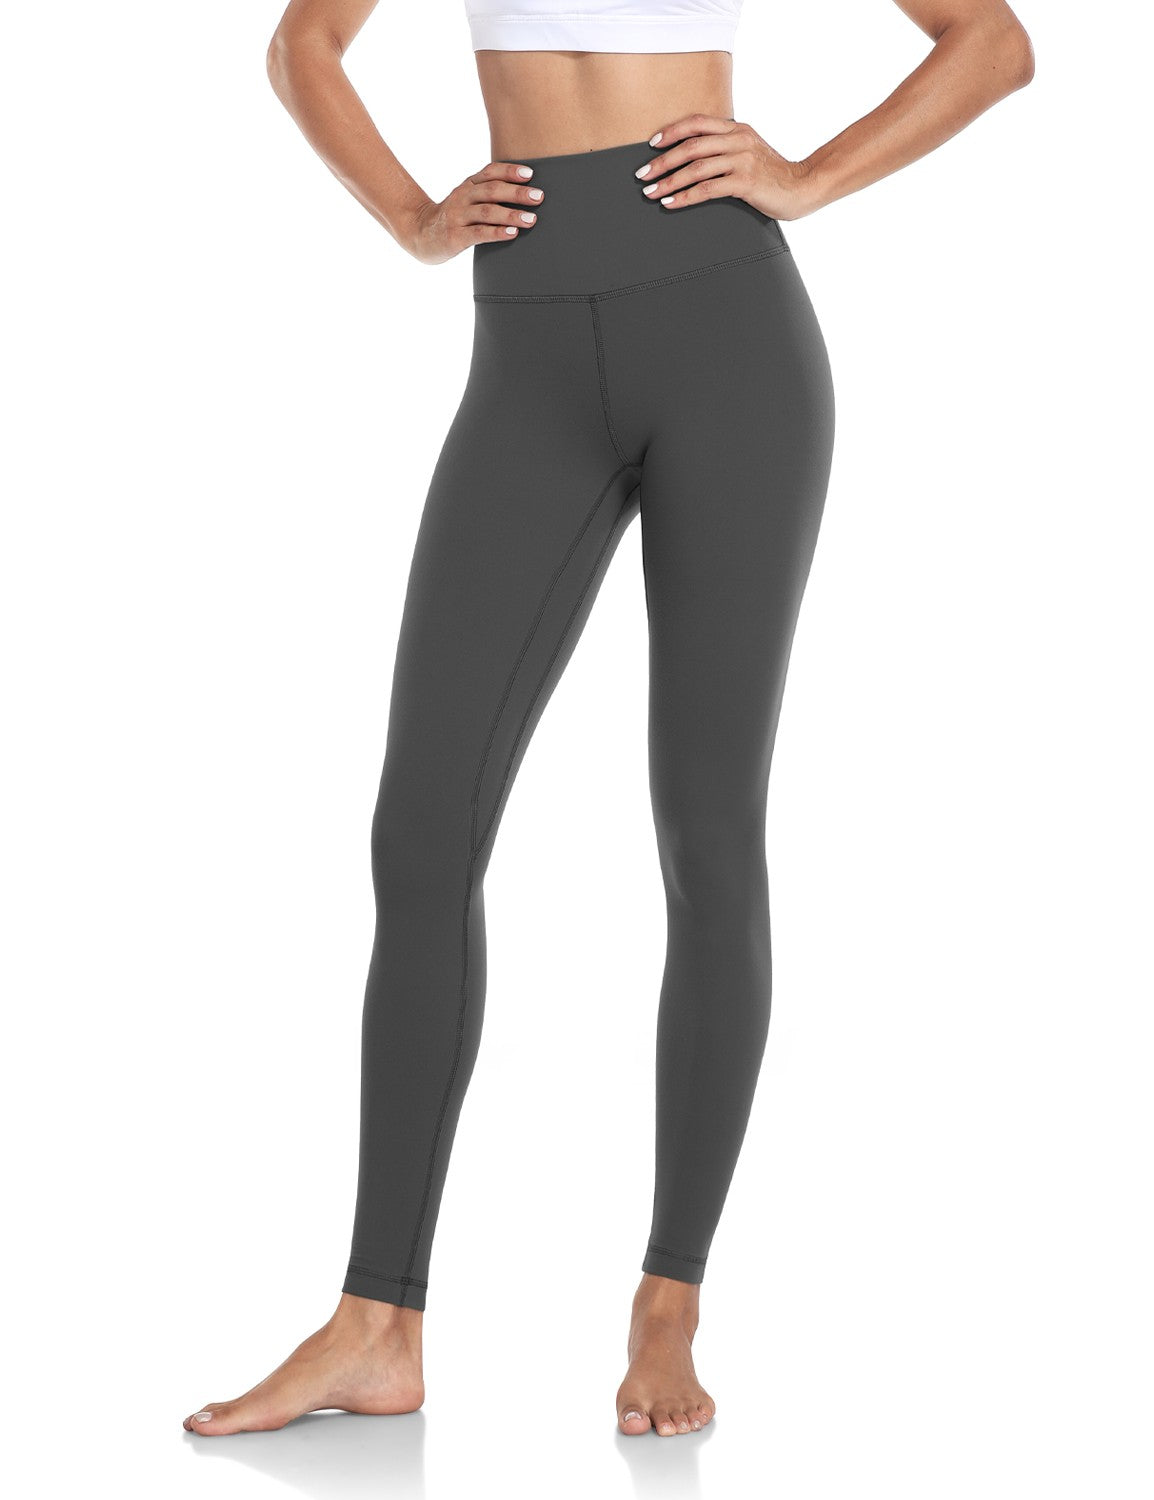  HeyNuts Extra Long High Waisted Leggings for Tall